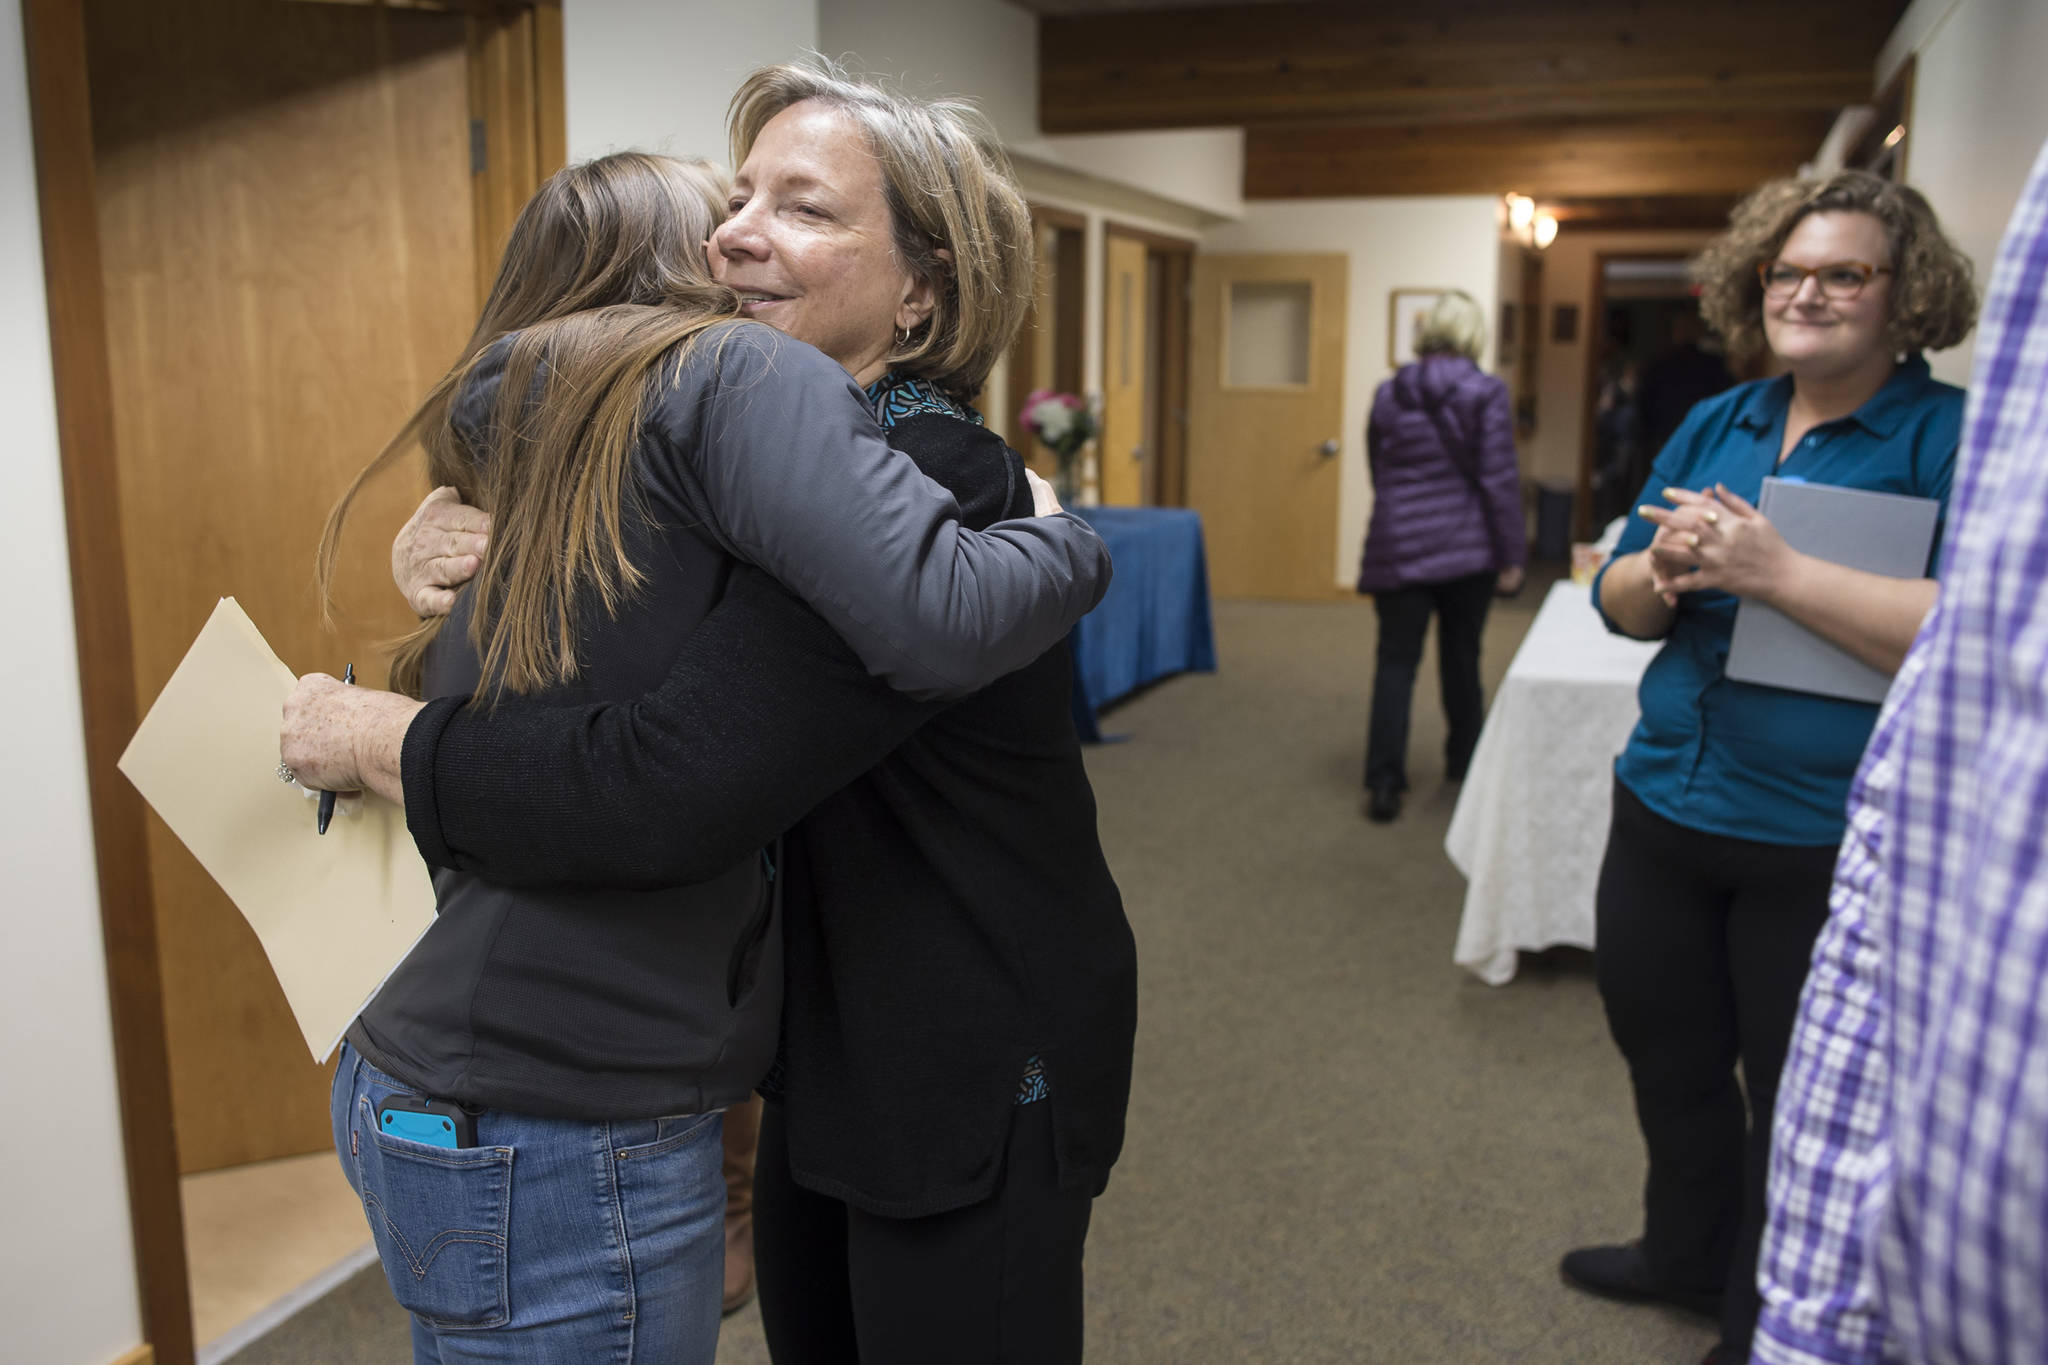 Chava Lee, President of the Congreation Sukkat Shalom Board, center, hugs Melissa Goldstein during a gathering at Temple Sukkat Shalom on Tuesday, Oct. 30, 2018, to honor the memory of the 11 people killed by a gunman at the Tree of Life synagogue in Pittsburgh, Pennsylvania, on Saturday. (Michael Penn | Juneau Empire)